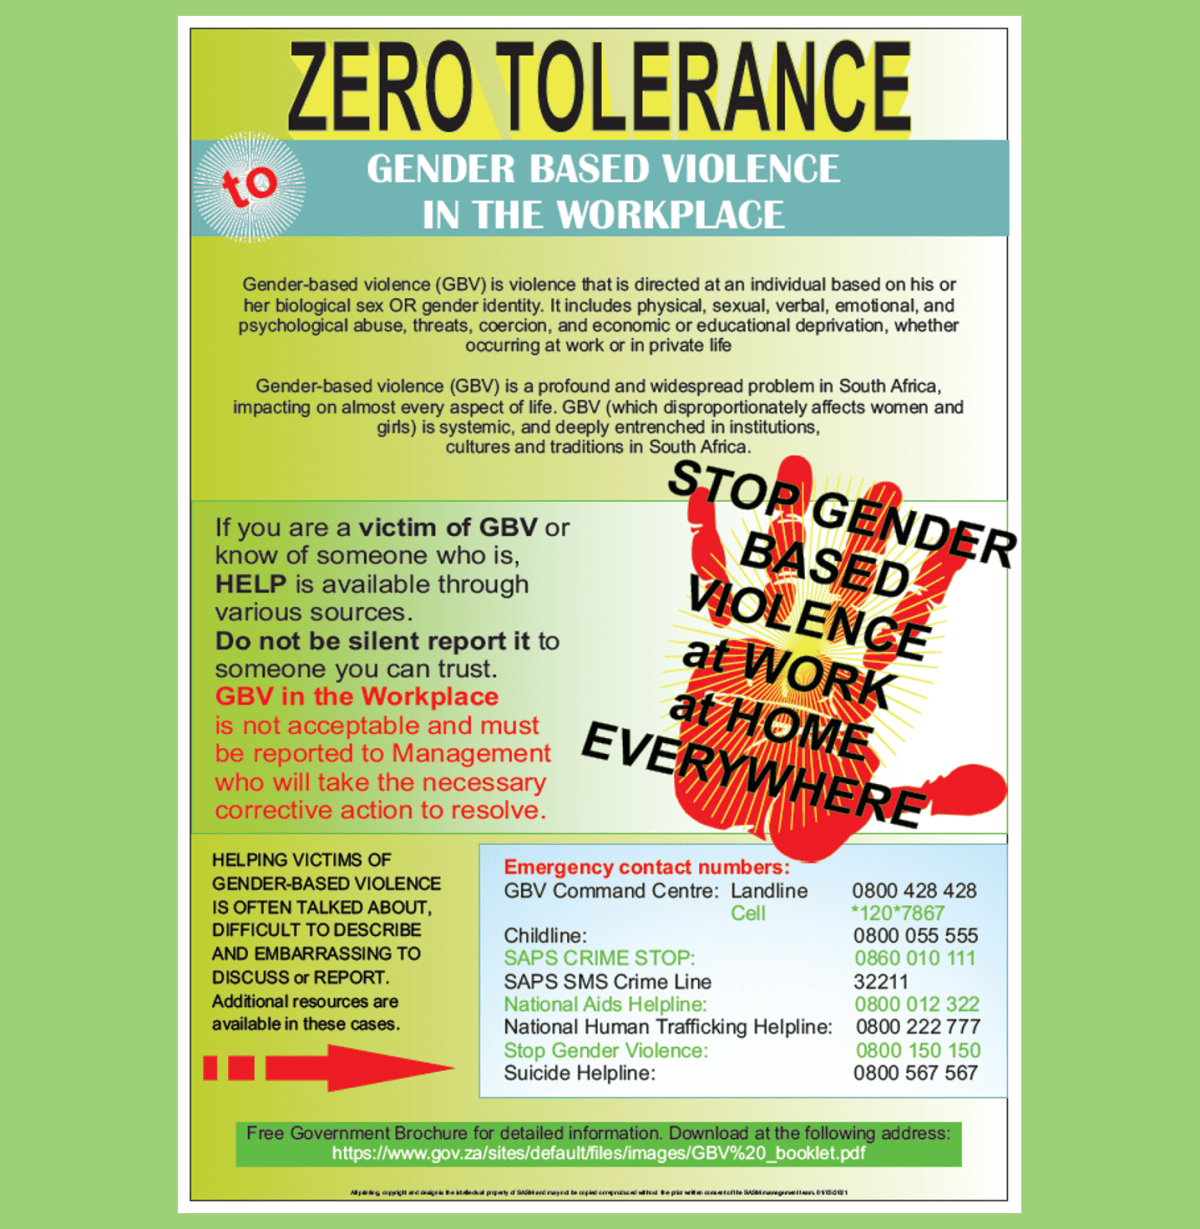 ZERO TOLERANCE - GENDER BASED VIOLENCE in the WORKPLACE